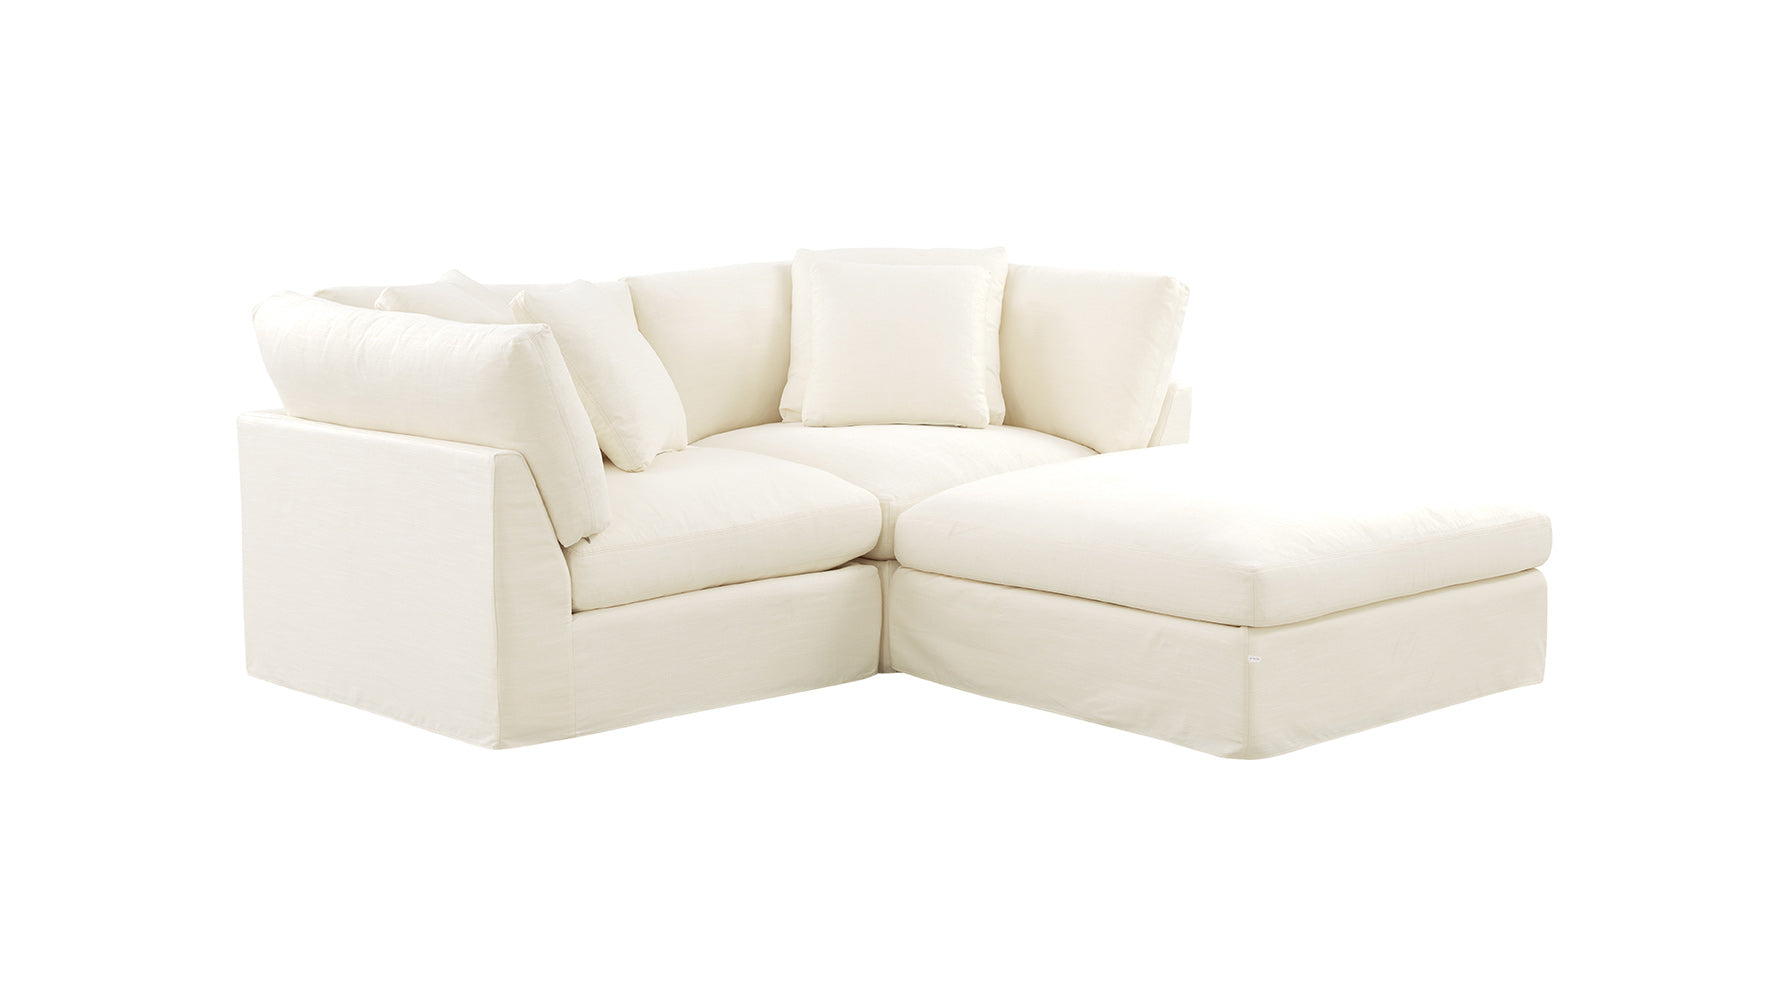 Get Together™ 3-Piece Modular Sectional, Large, Cream Linen - Image 2